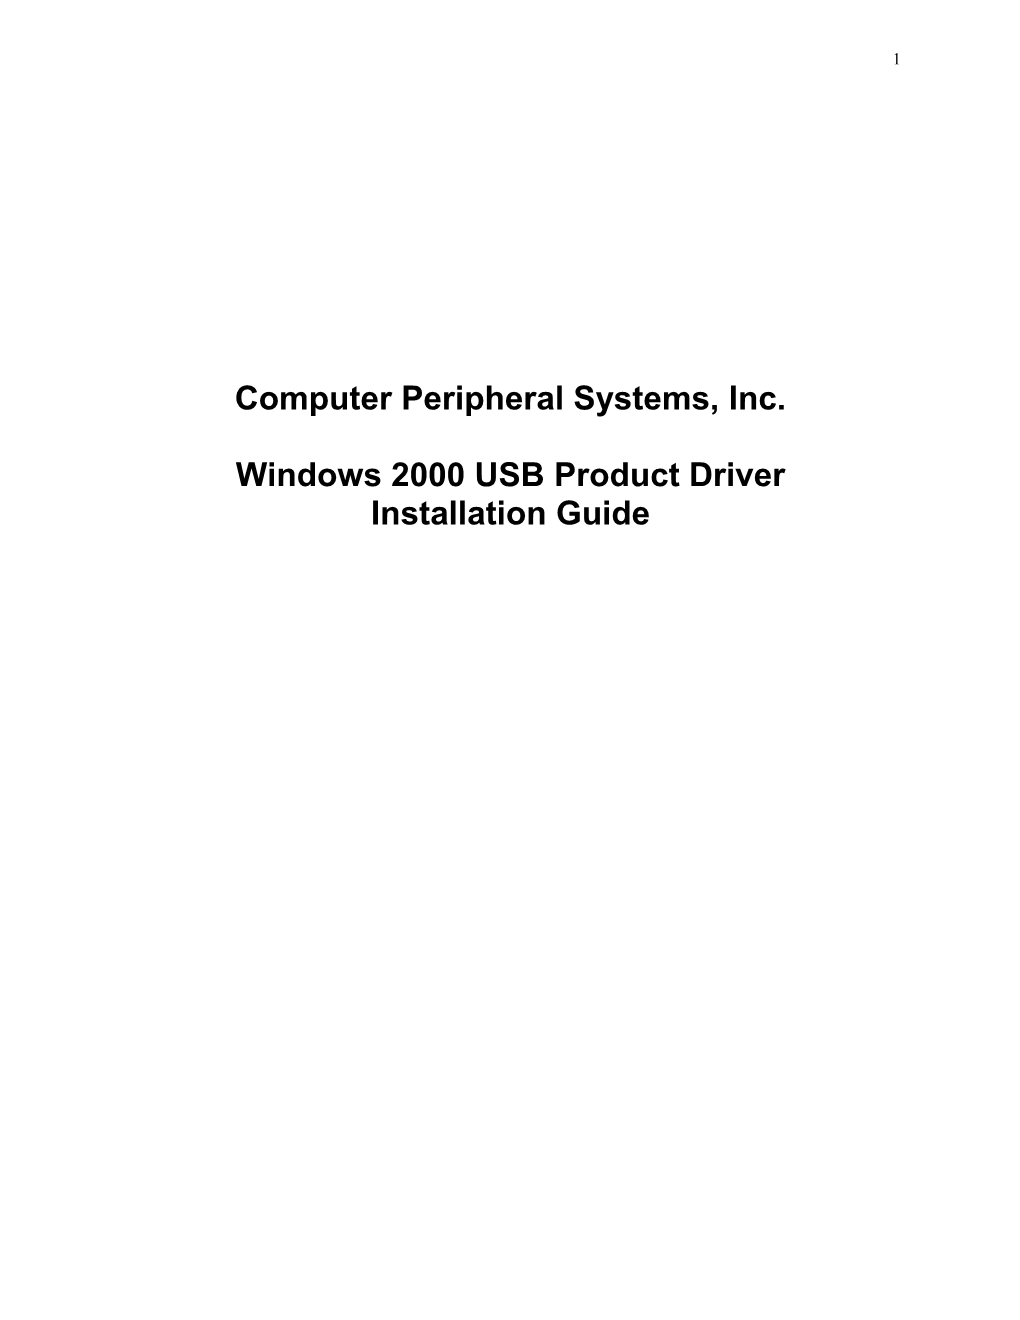 Computer Peripheral Systems, Inc